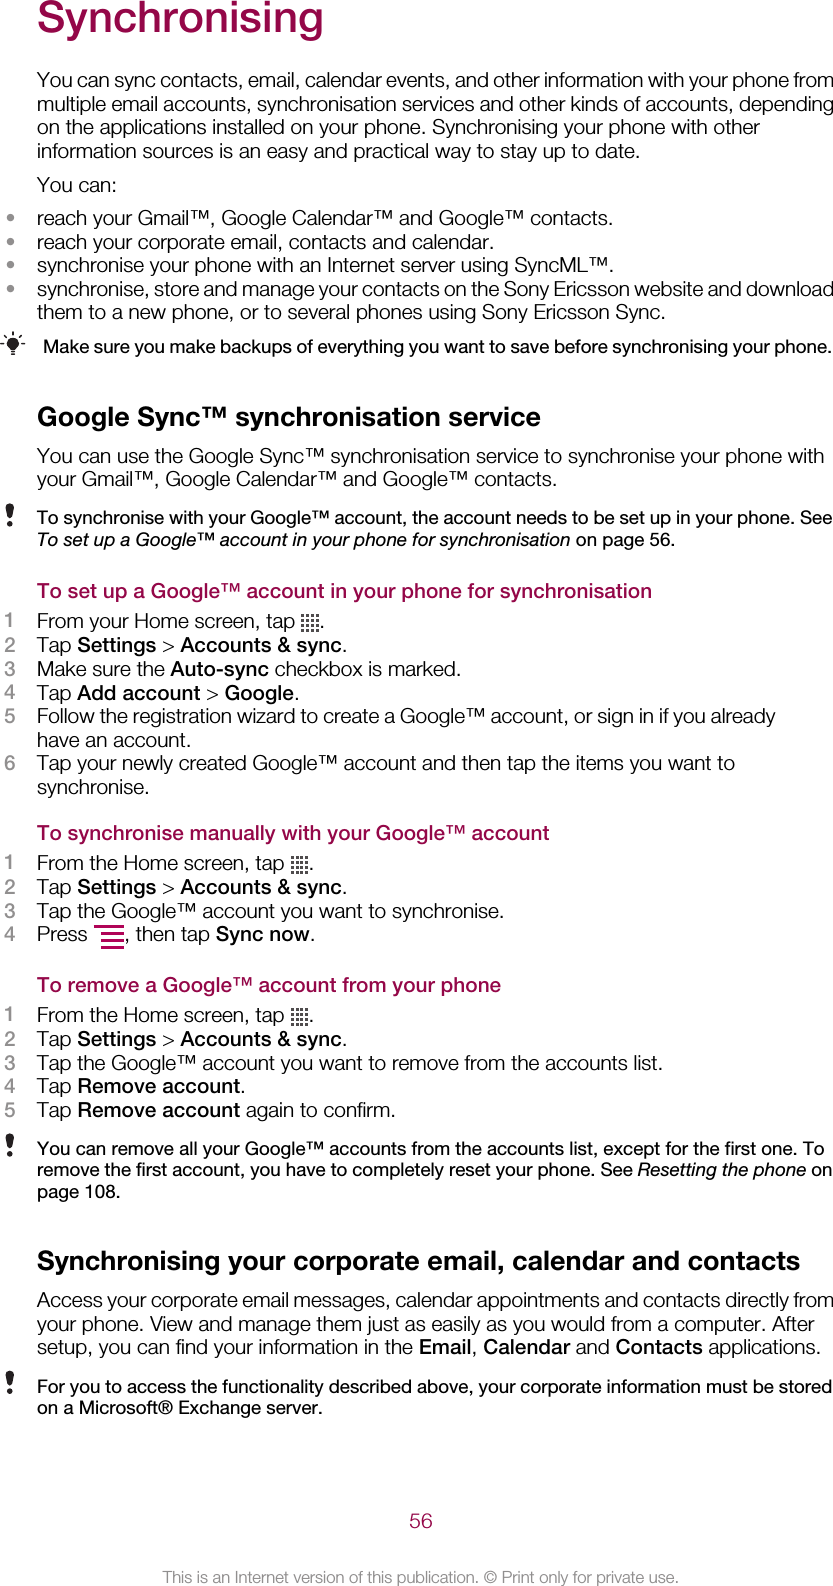 SynchronisingYou can sync contacts, email, calendar events, and other information with your phone frommultiple email accounts, synchronisation services and other kinds of accounts, dependingon the applications installed on your phone. Synchronising your phone with otherinformation sources is an easy and practical way to stay up to date.You can:•reach your Gmail™, Google Calendar™ and Google™ contacts.•reach your corporate email, contacts and calendar.•synchronise your phone with an Internet server using SyncML™.•synchronise, store and manage your contacts on the Sony Ericsson website and downloadthem to a new phone, or to several phones using Sony Ericsson Sync.Make sure you make backups of everything you want to save before synchronising your phone.Google Sync™ synchronisation serviceYou can use the Google Sync™ synchronisation service to synchronise your phone withyour Gmail™, Google Calendar™ and Google™ contacts.To synchronise with your Google™ account, the account needs to be set up in your phone. SeeTo set up a Google™ account in your phone for synchronisation on page 56.To set up a Google™ account in your phone for synchronisation1From your Home screen, tap  .2Tap Settings &gt; Accounts &amp; sync.3Make sure the Auto-sync checkbox is marked.4Tap Add account &gt; Google.5Follow the registration wizard to create a Google™ account, or sign in if you alreadyhave an account.6Tap your newly created Google™ account and then tap the items you want tosynchronise.To synchronise manually with your Google™ account1From the Home screen, tap  .2Tap Settings &gt; Accounts &amp; sync.3Tap the Google™ account you want to synchronise.4Press  , then tap Sync now.To remove a Google™ account from your phone1From the Home screen, tap  .2Tap Settings &gt; Accounts &amp; sync.3Tap the Google™ account you want to remove from the accounts list.4Tap Remove account.5Tap Remove account again to confirm.You can remove all your Google™ accounts from the accounts list, except for the first one. Toremove the first account, you have to completely reset your phone. See Resetting the phone onpage 108.Synchronising your corporate email, calendar and contactsAccess your corporate email messages, calendar appointments and contacts directly fromyour phone. View and manage them just as easily as you would from a computer. Aftersetup, you can find your information in the Email, Calendar and Contacts applications.For you to access the functionality described above, your corporate information must be storedon a Microsoft® Exchange server.56This is an Internet version of this publication. © Print only for private use.